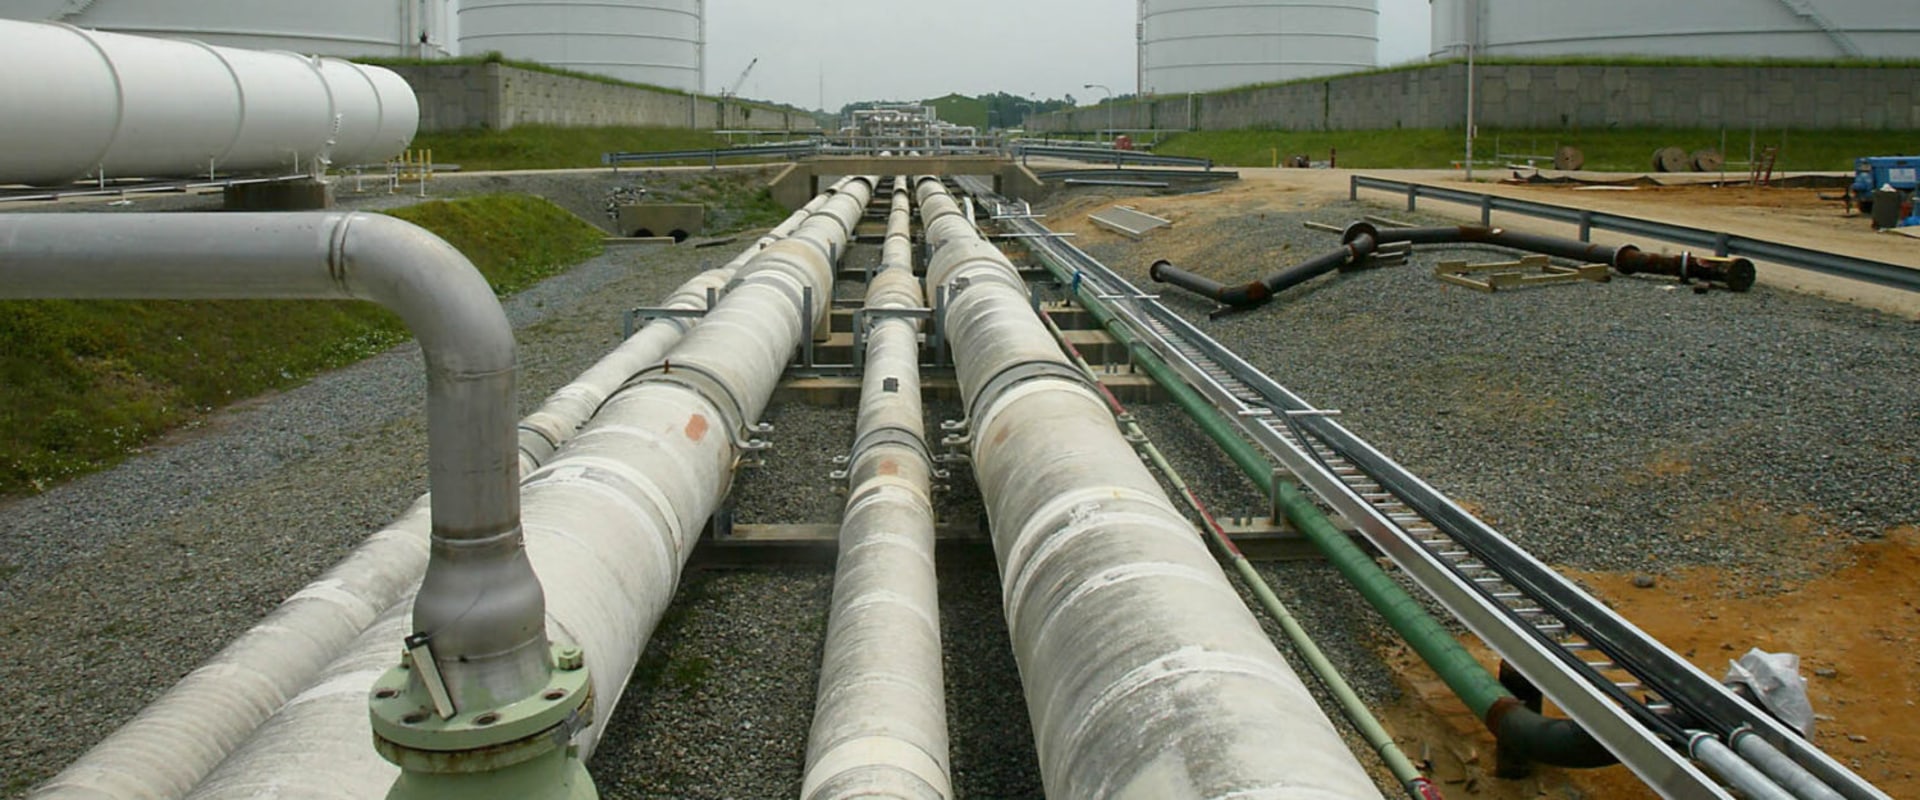 How long do natural gas pipelines last?